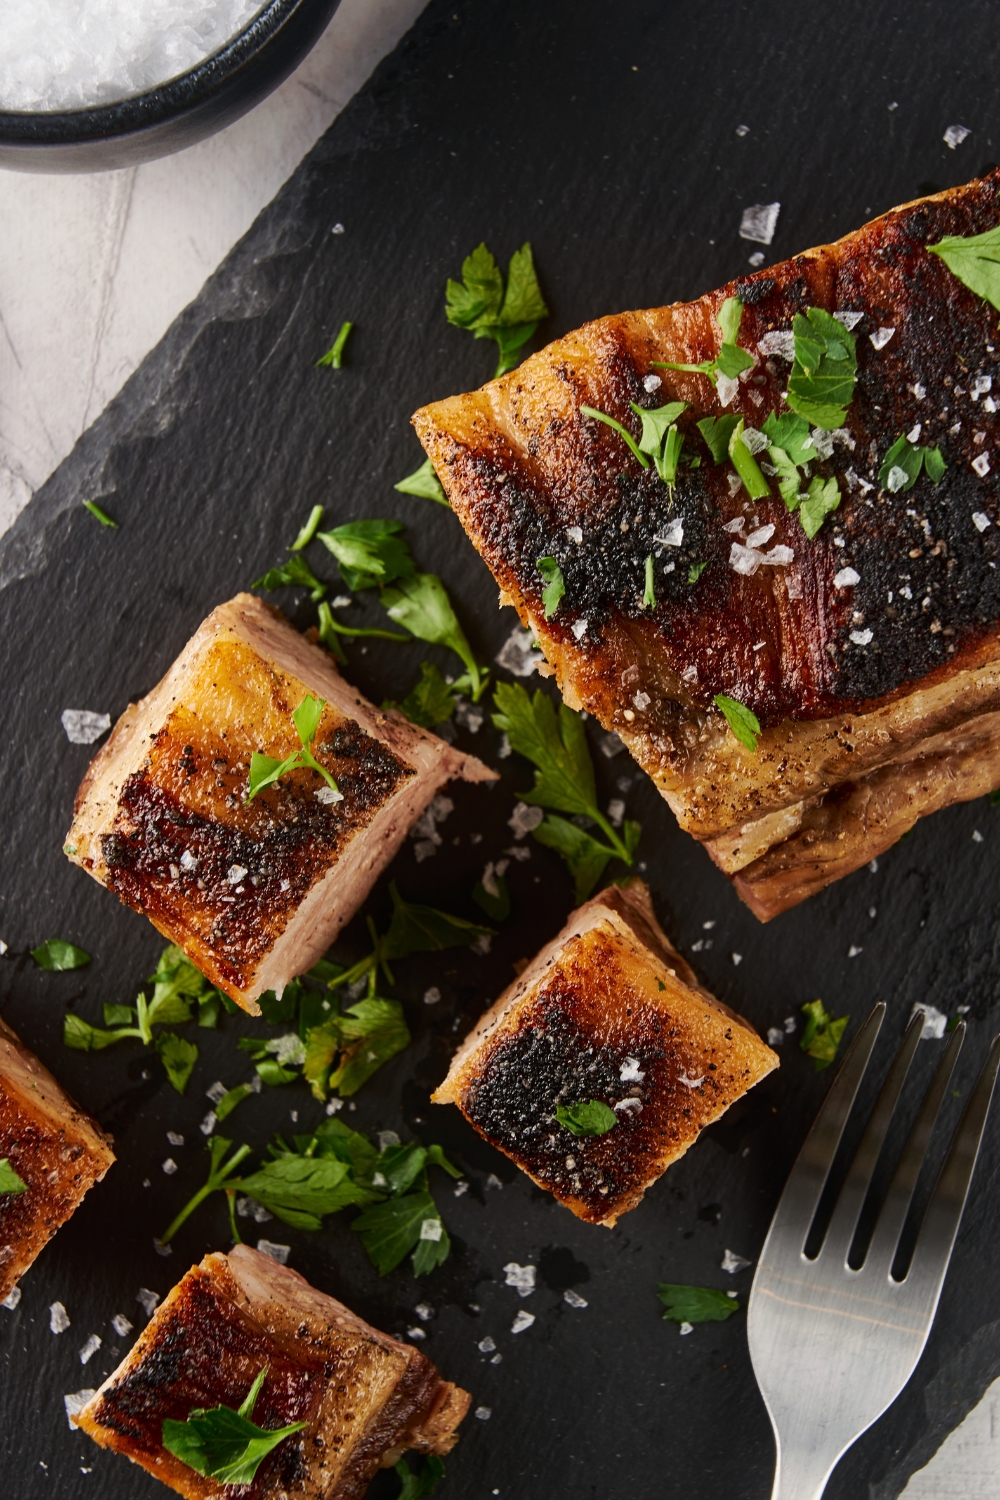 Overhead view of seared pork belly cut into squares. The pork belly is on a black piece of slate and is garnished with fresh parsley and coarse salt. There is a fork next to the pork belly.